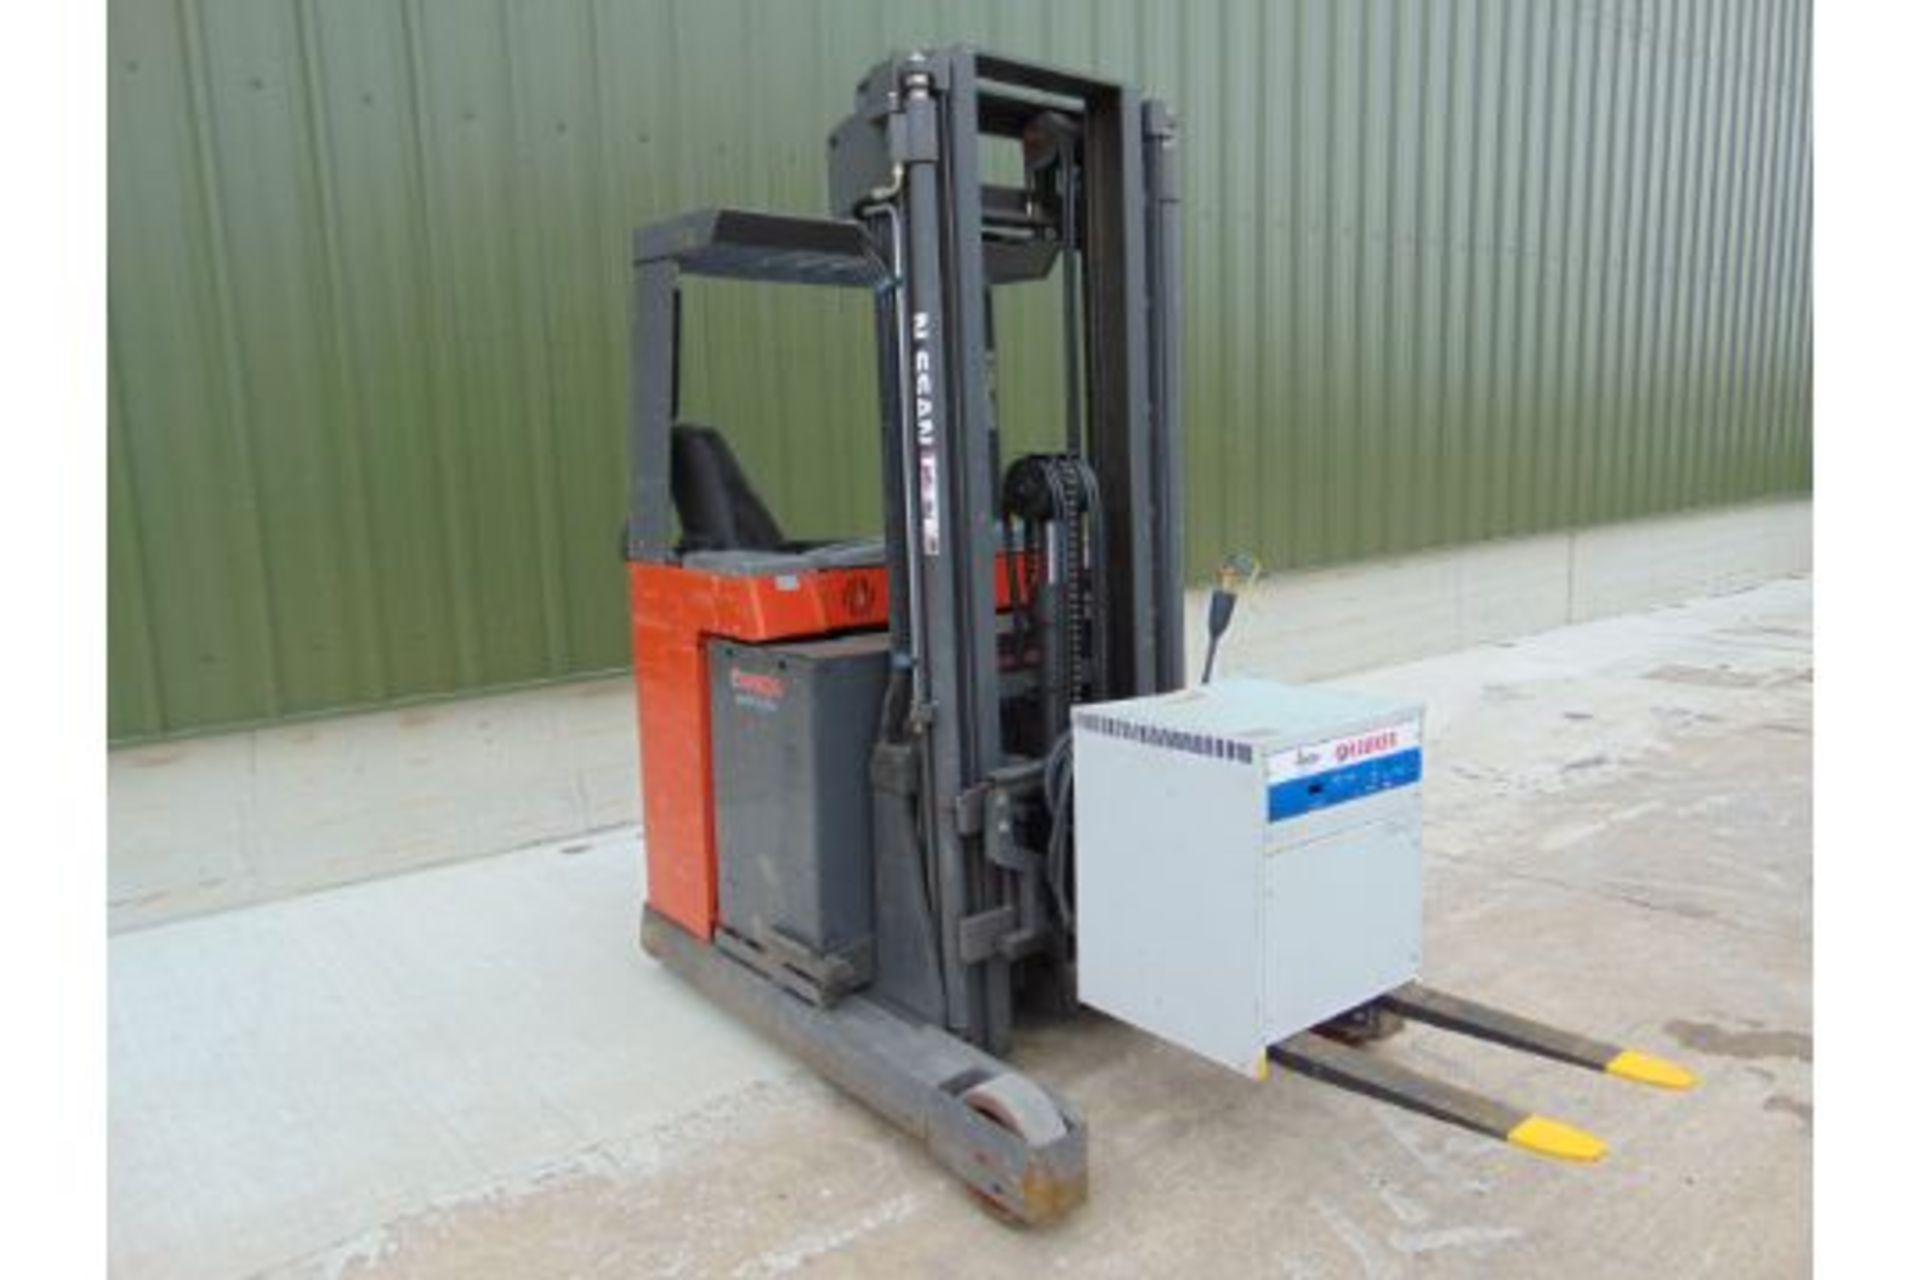 2005 Nissan UNS-200 Electric Reach Fork Lift w/ Battery Charger Unit - Image 18 of 31